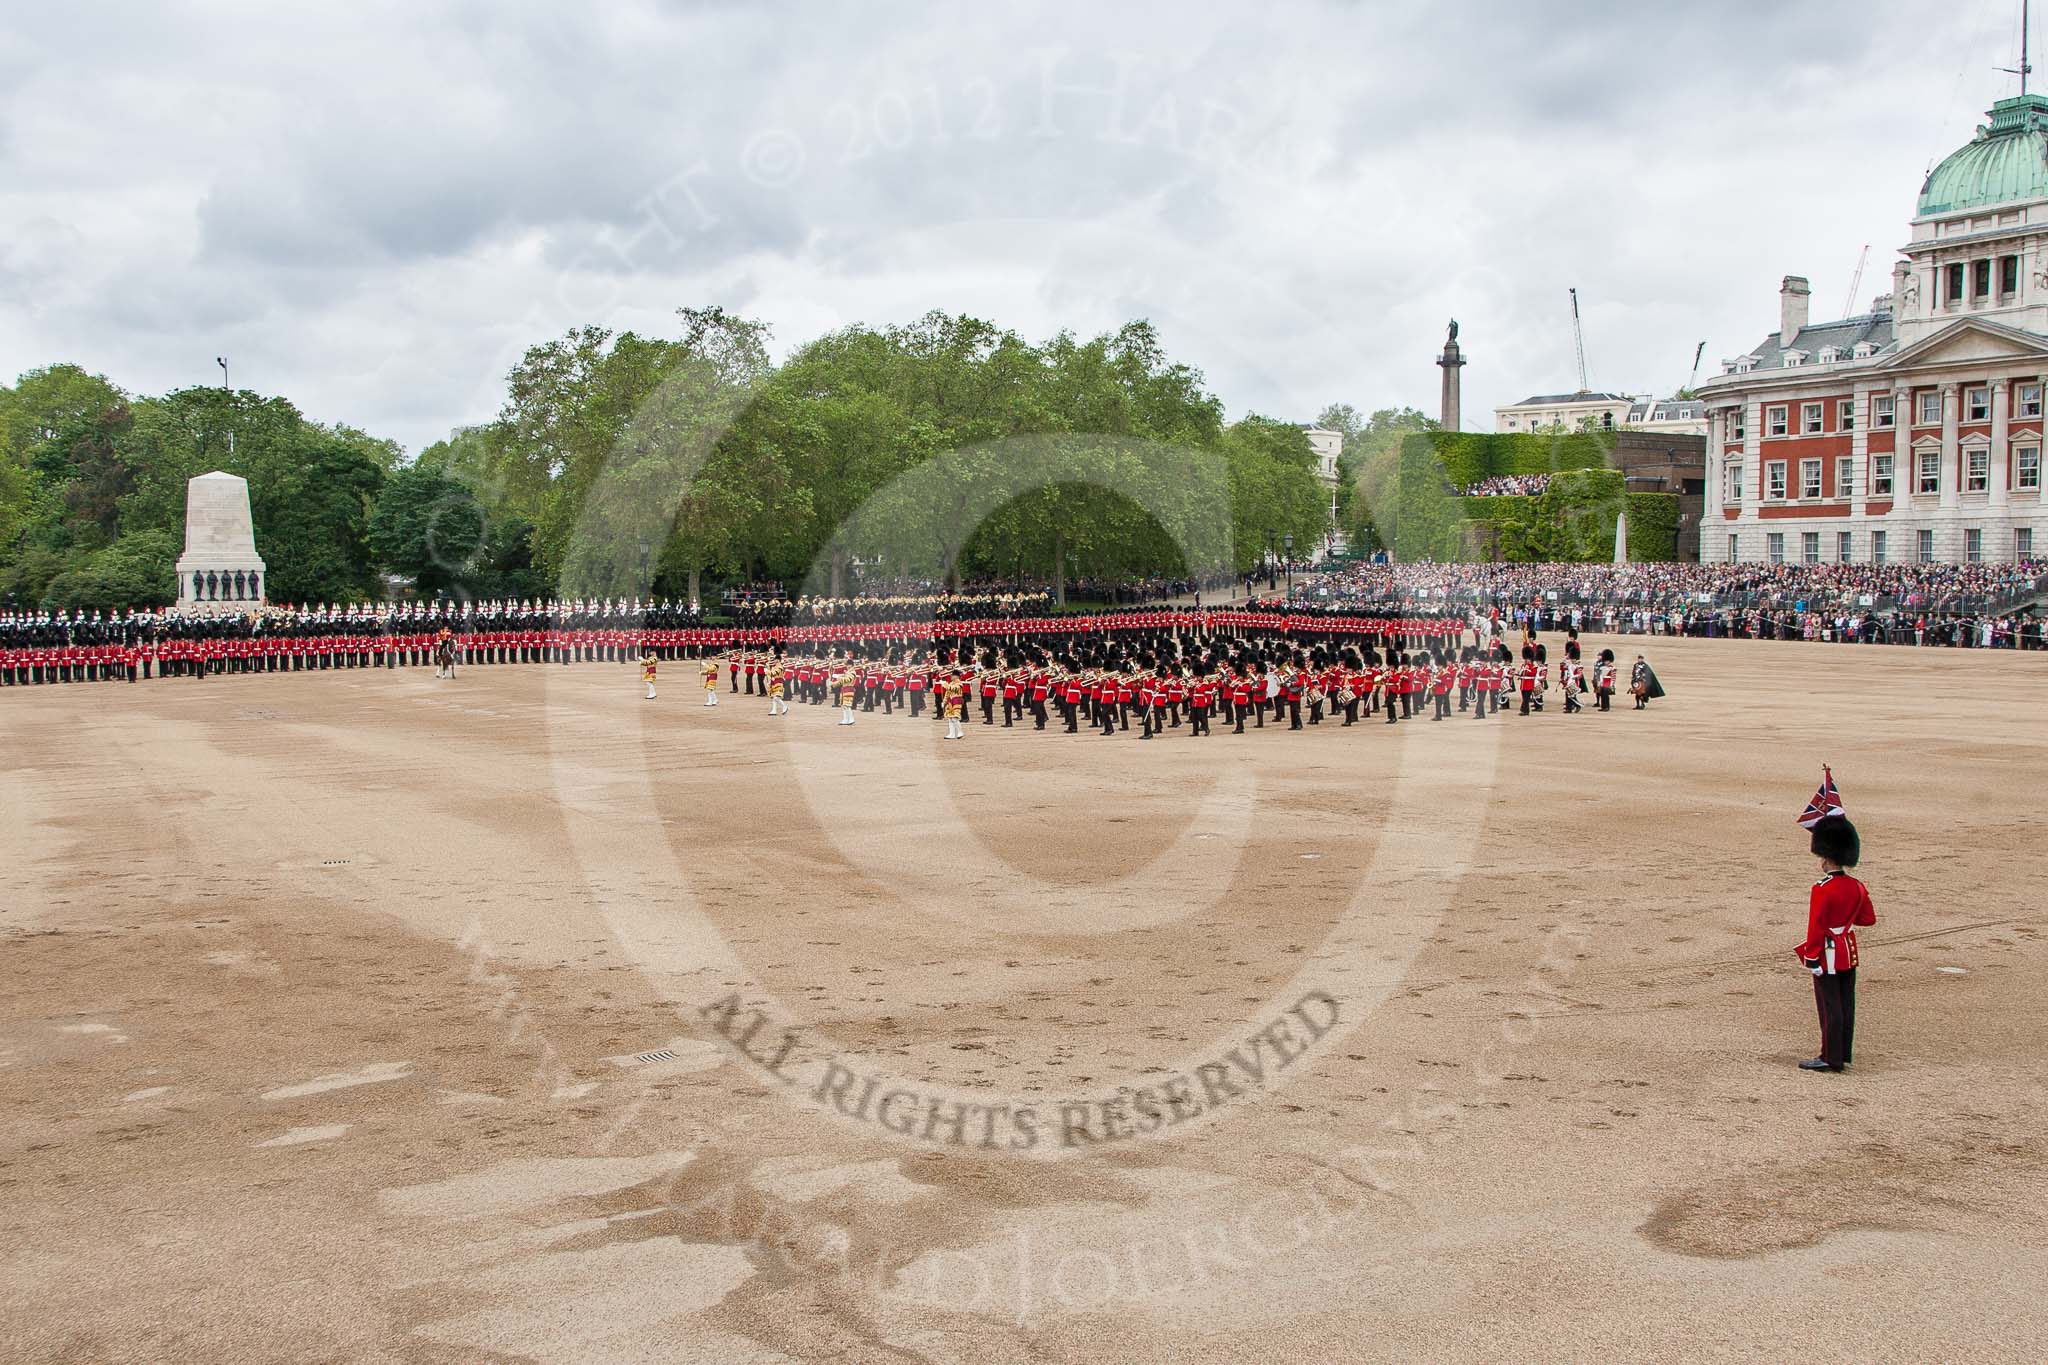 Trooping the Colour 2012.
Horse Guards Parade, Westminster,
London SW1,

United Kingdom,
on 16 June 2012 at 11:12, image #270